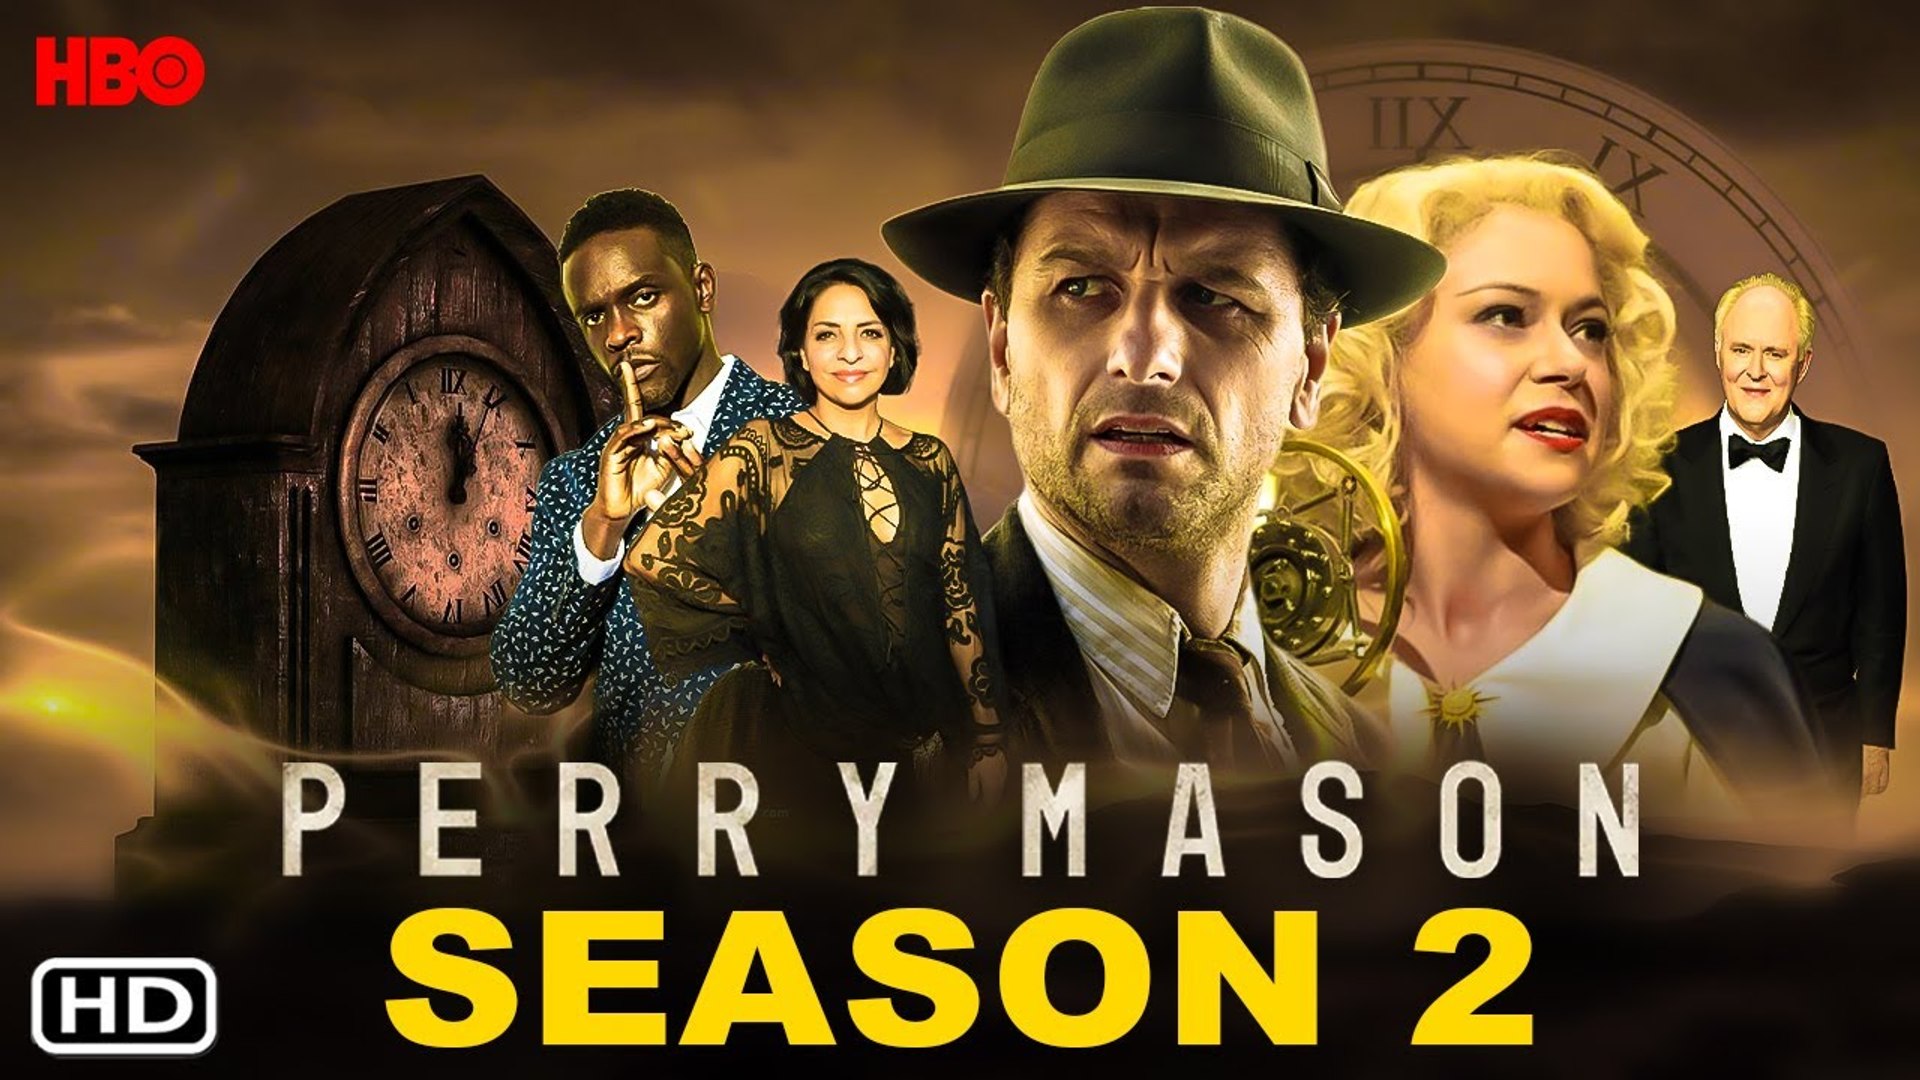 Perry Mason Season 2 Trailer HBO, Release Date - video Dailymotion